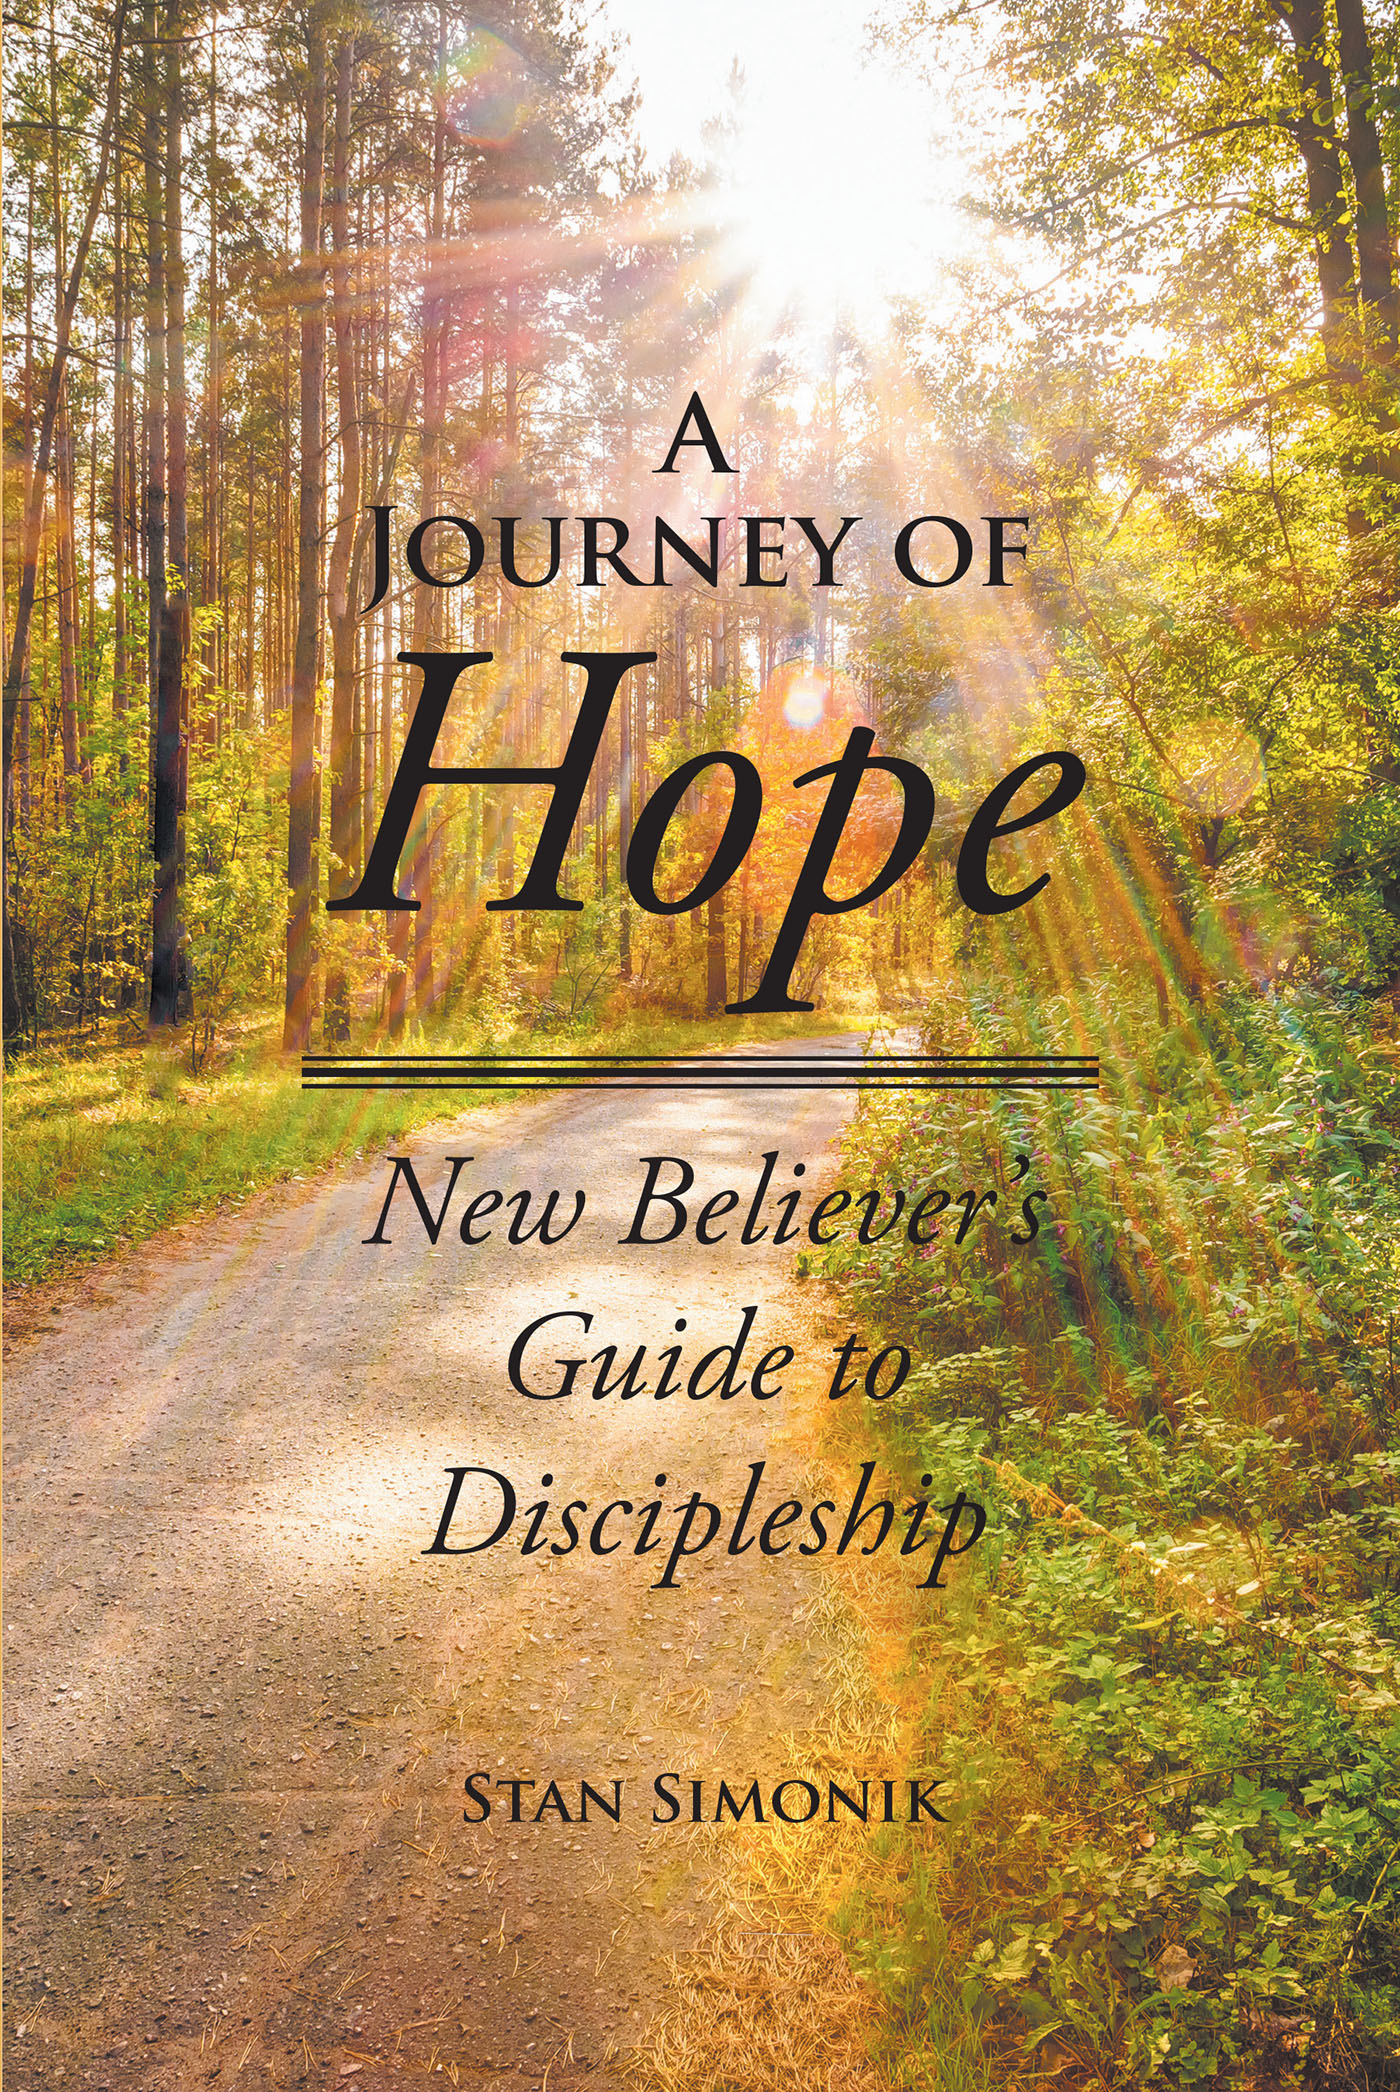 Stan Simonik’s Newly Released "A Journey of Hope: New Believer’s Guide to Discipleship" is an Easy-to-Understand Guide to Learning How to Follow Christ